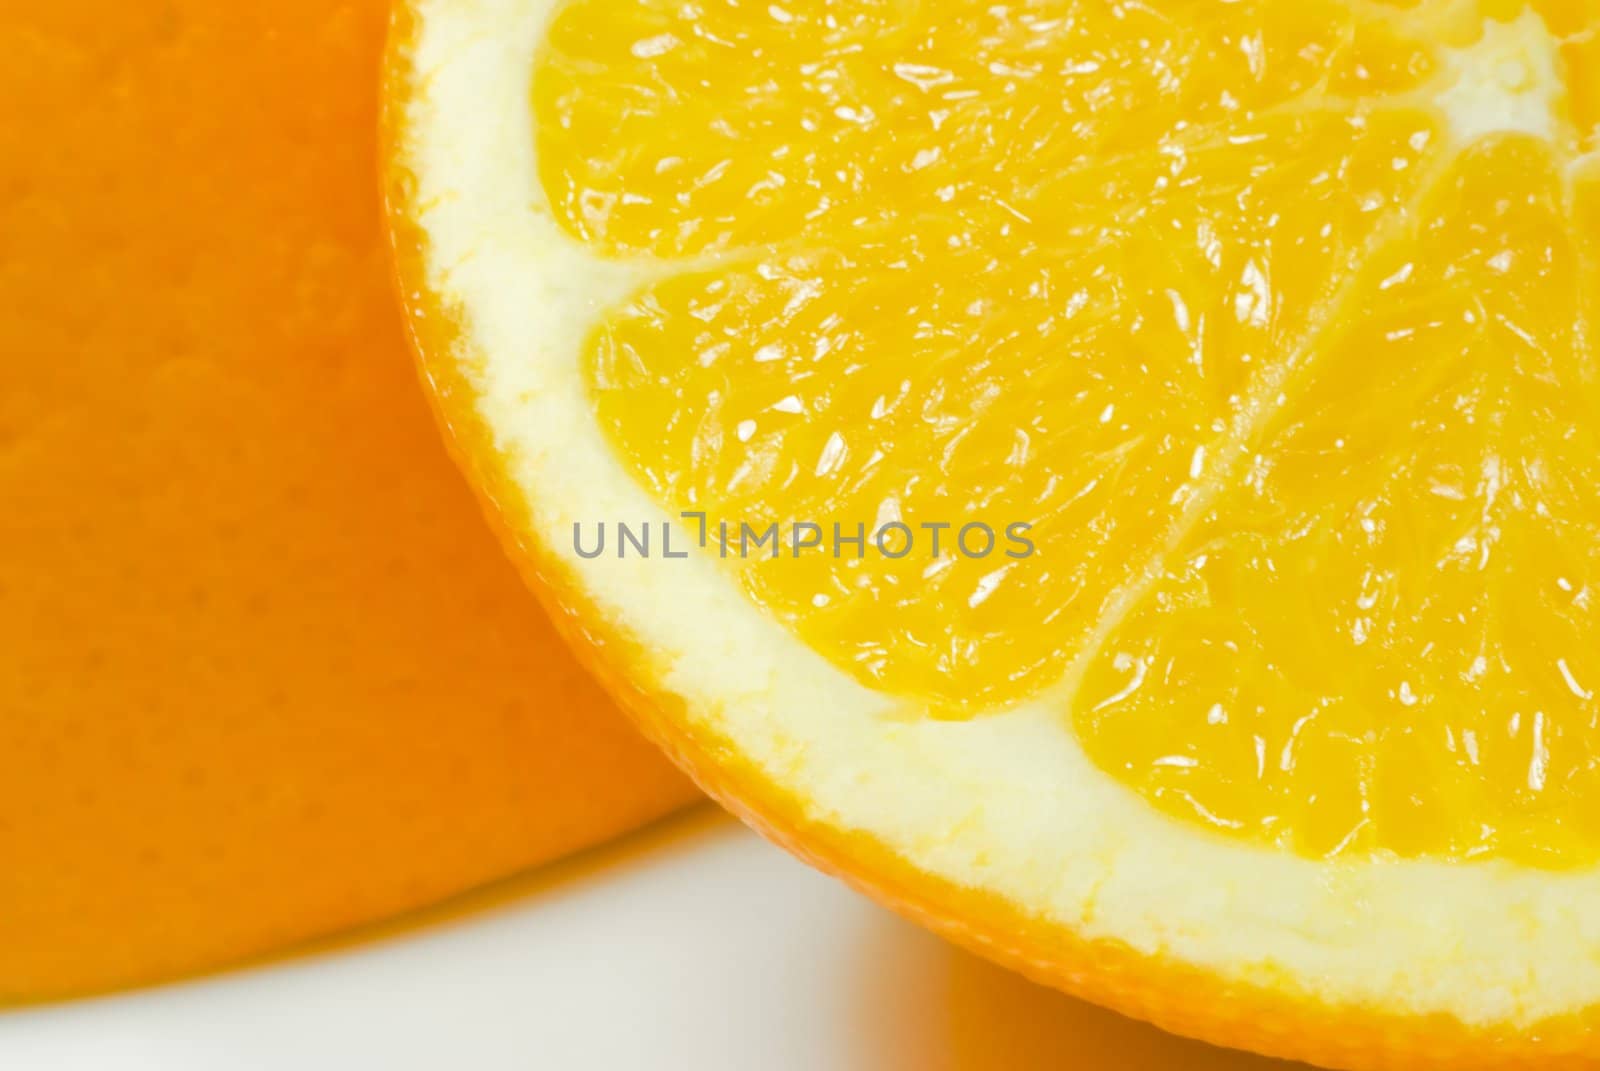 Close up (macro) of one slice of orange (quarter visible in foreground) leaning against upturned orange half, on white china surface with visible shadows.